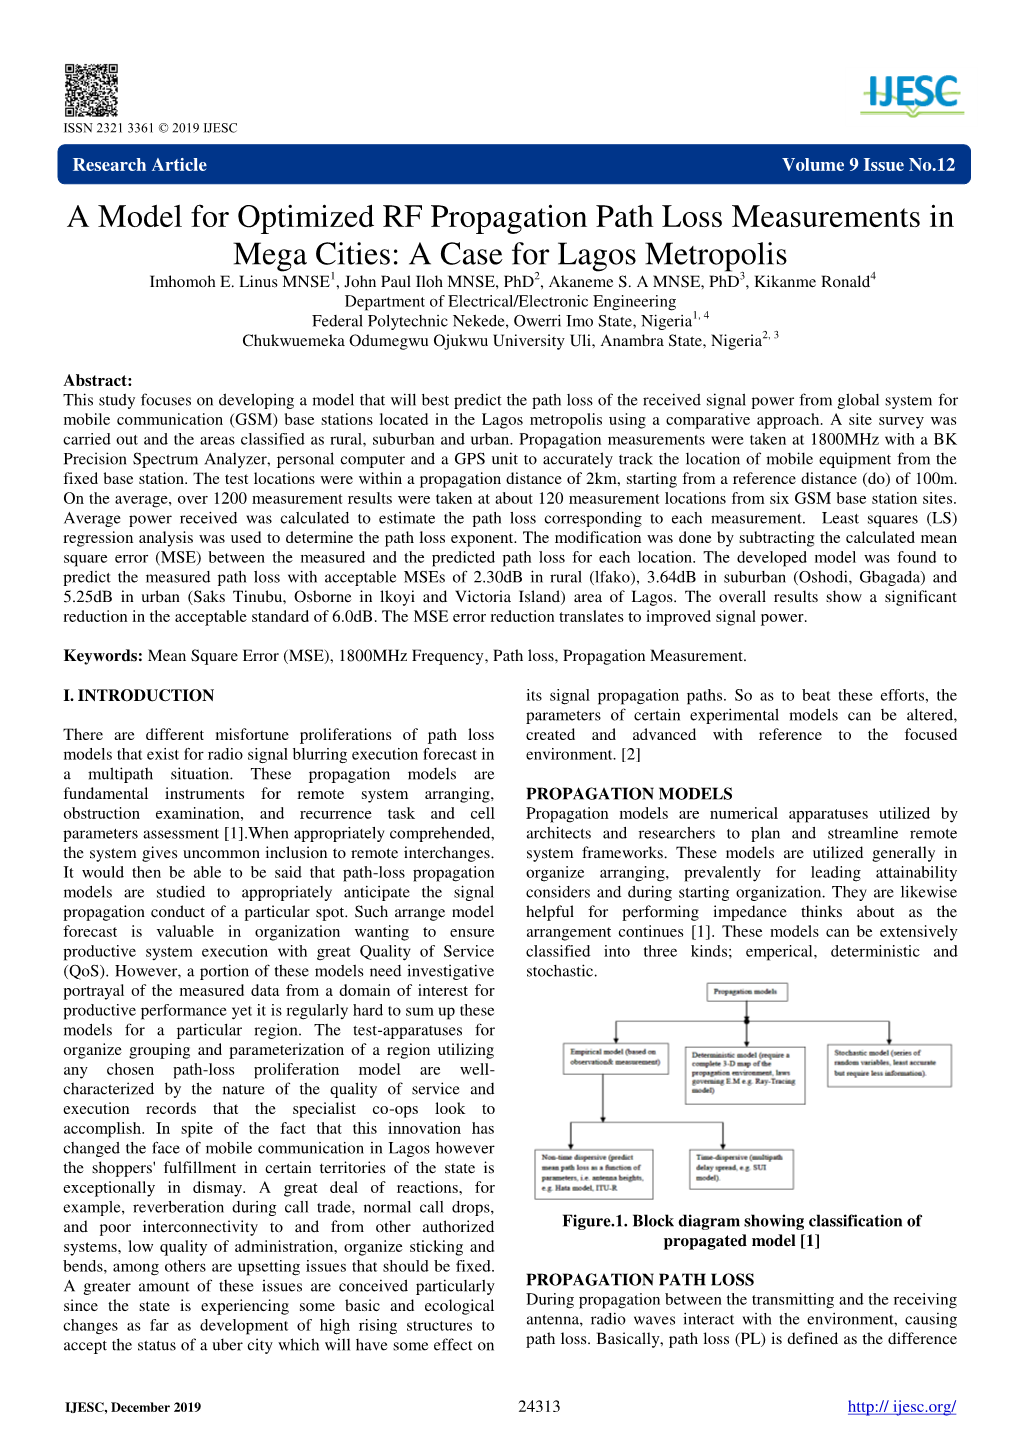 A Model for Optimized RF Propagation Path Loss Measurements in Mega Cities: a Case for Lagos Metropolis Imhomoh E